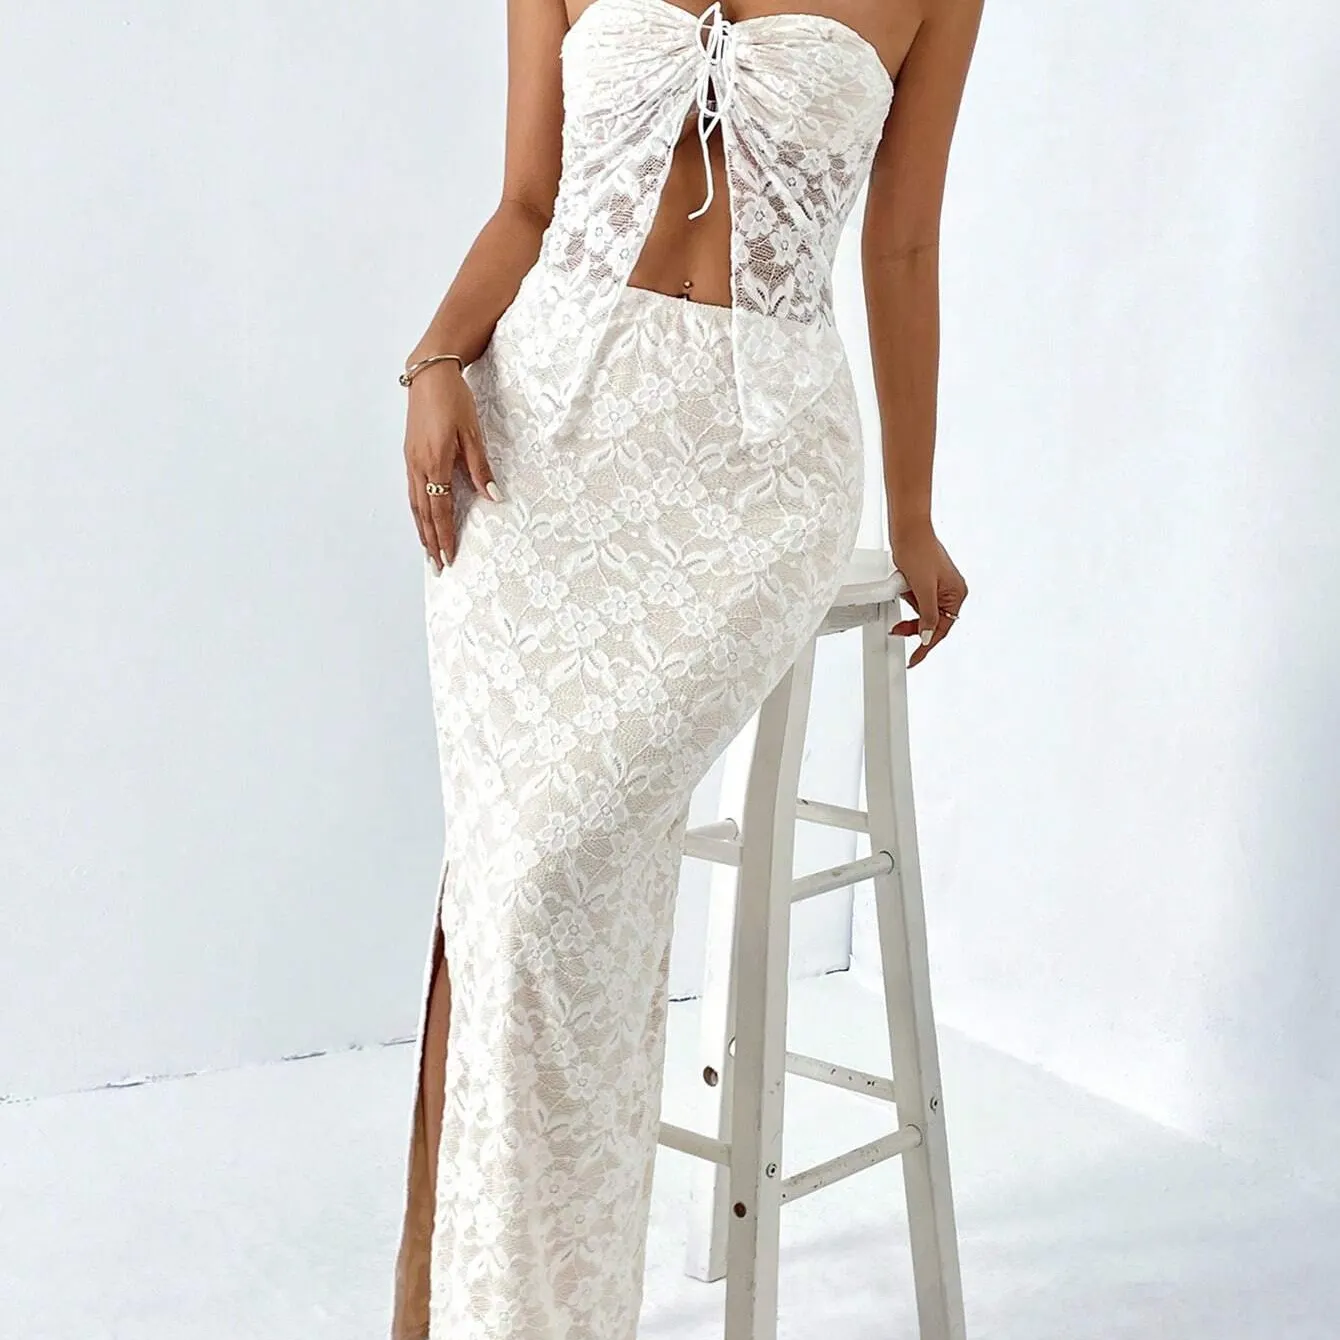 Custom Women Dress Sexy Summer Two Pieces Halter V-Neck Lace Bodycon Top And Lace Slit Skirt